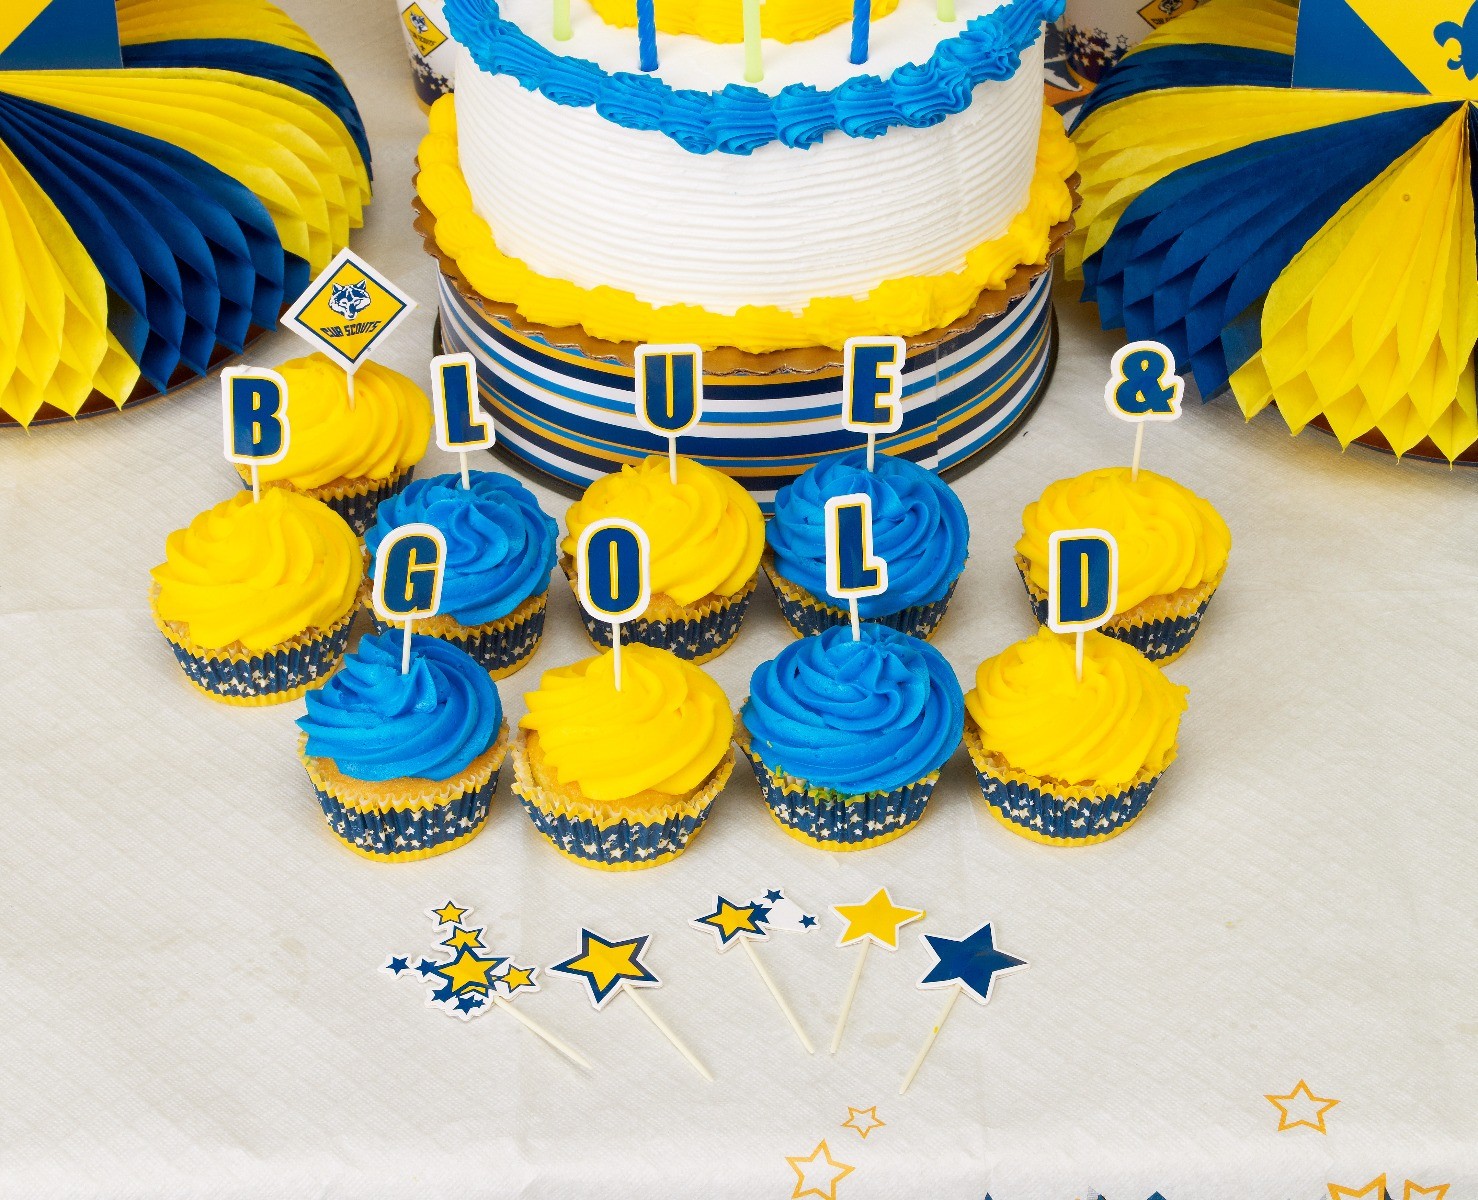 How To Plan A Blue and Gold Banquet